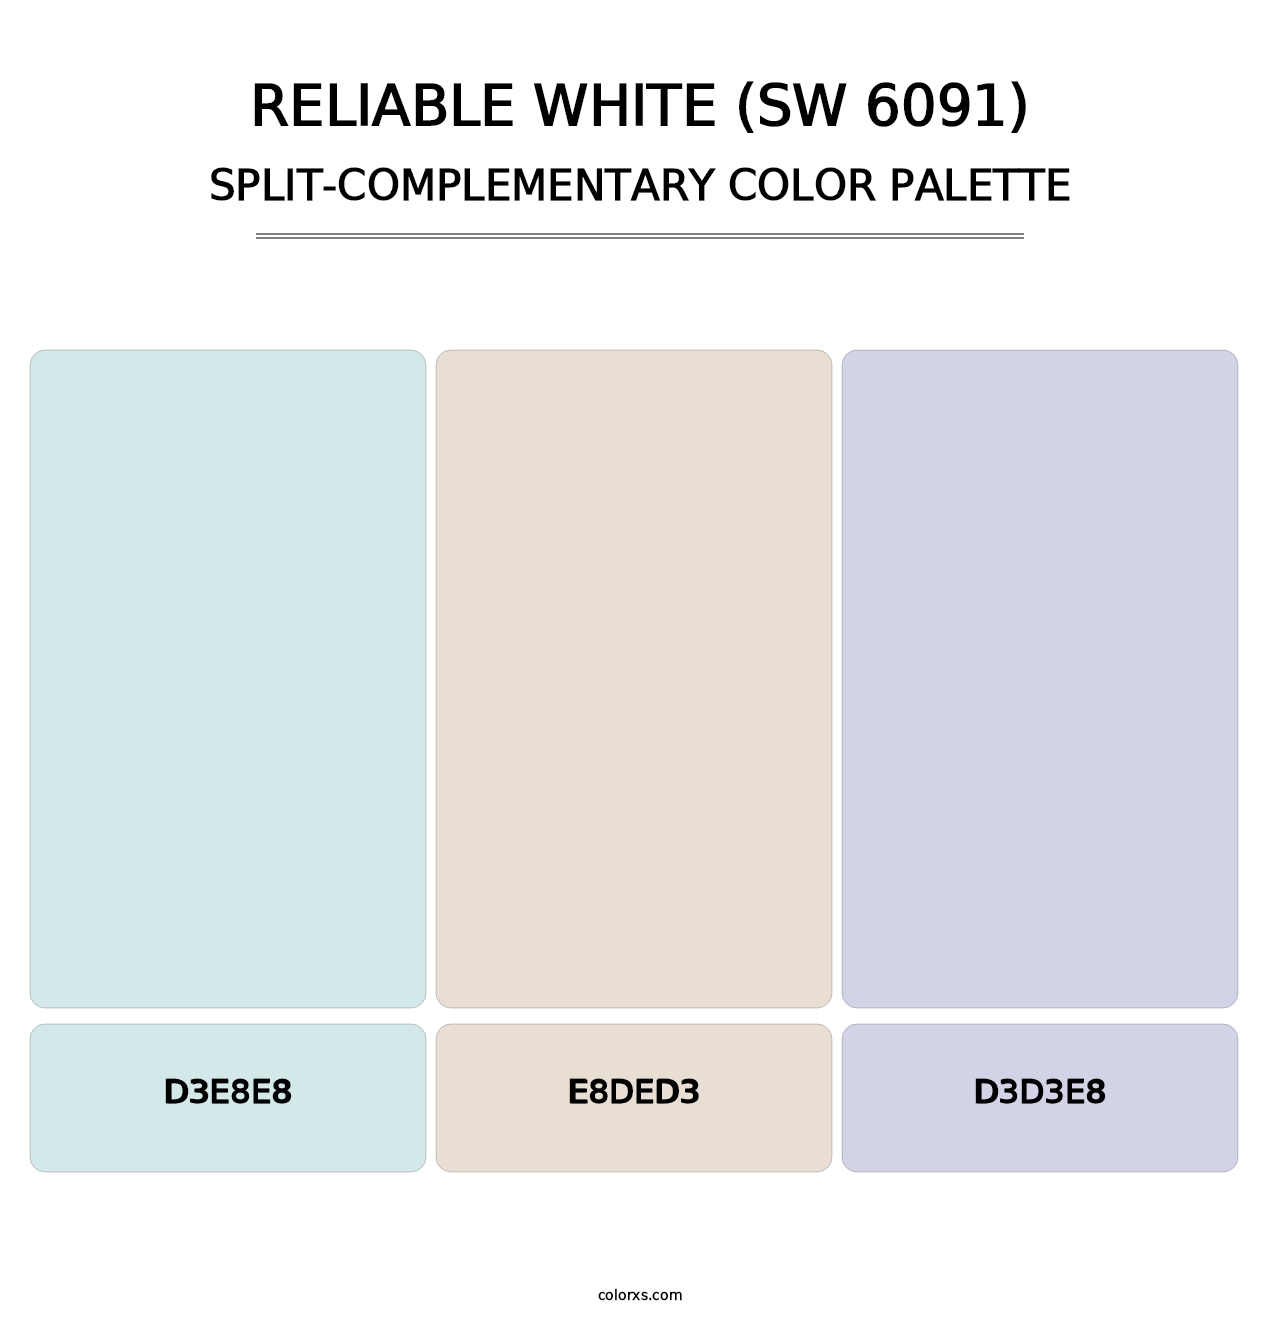 Reliable White (SW 6091) - Split-Complementary Color Palette